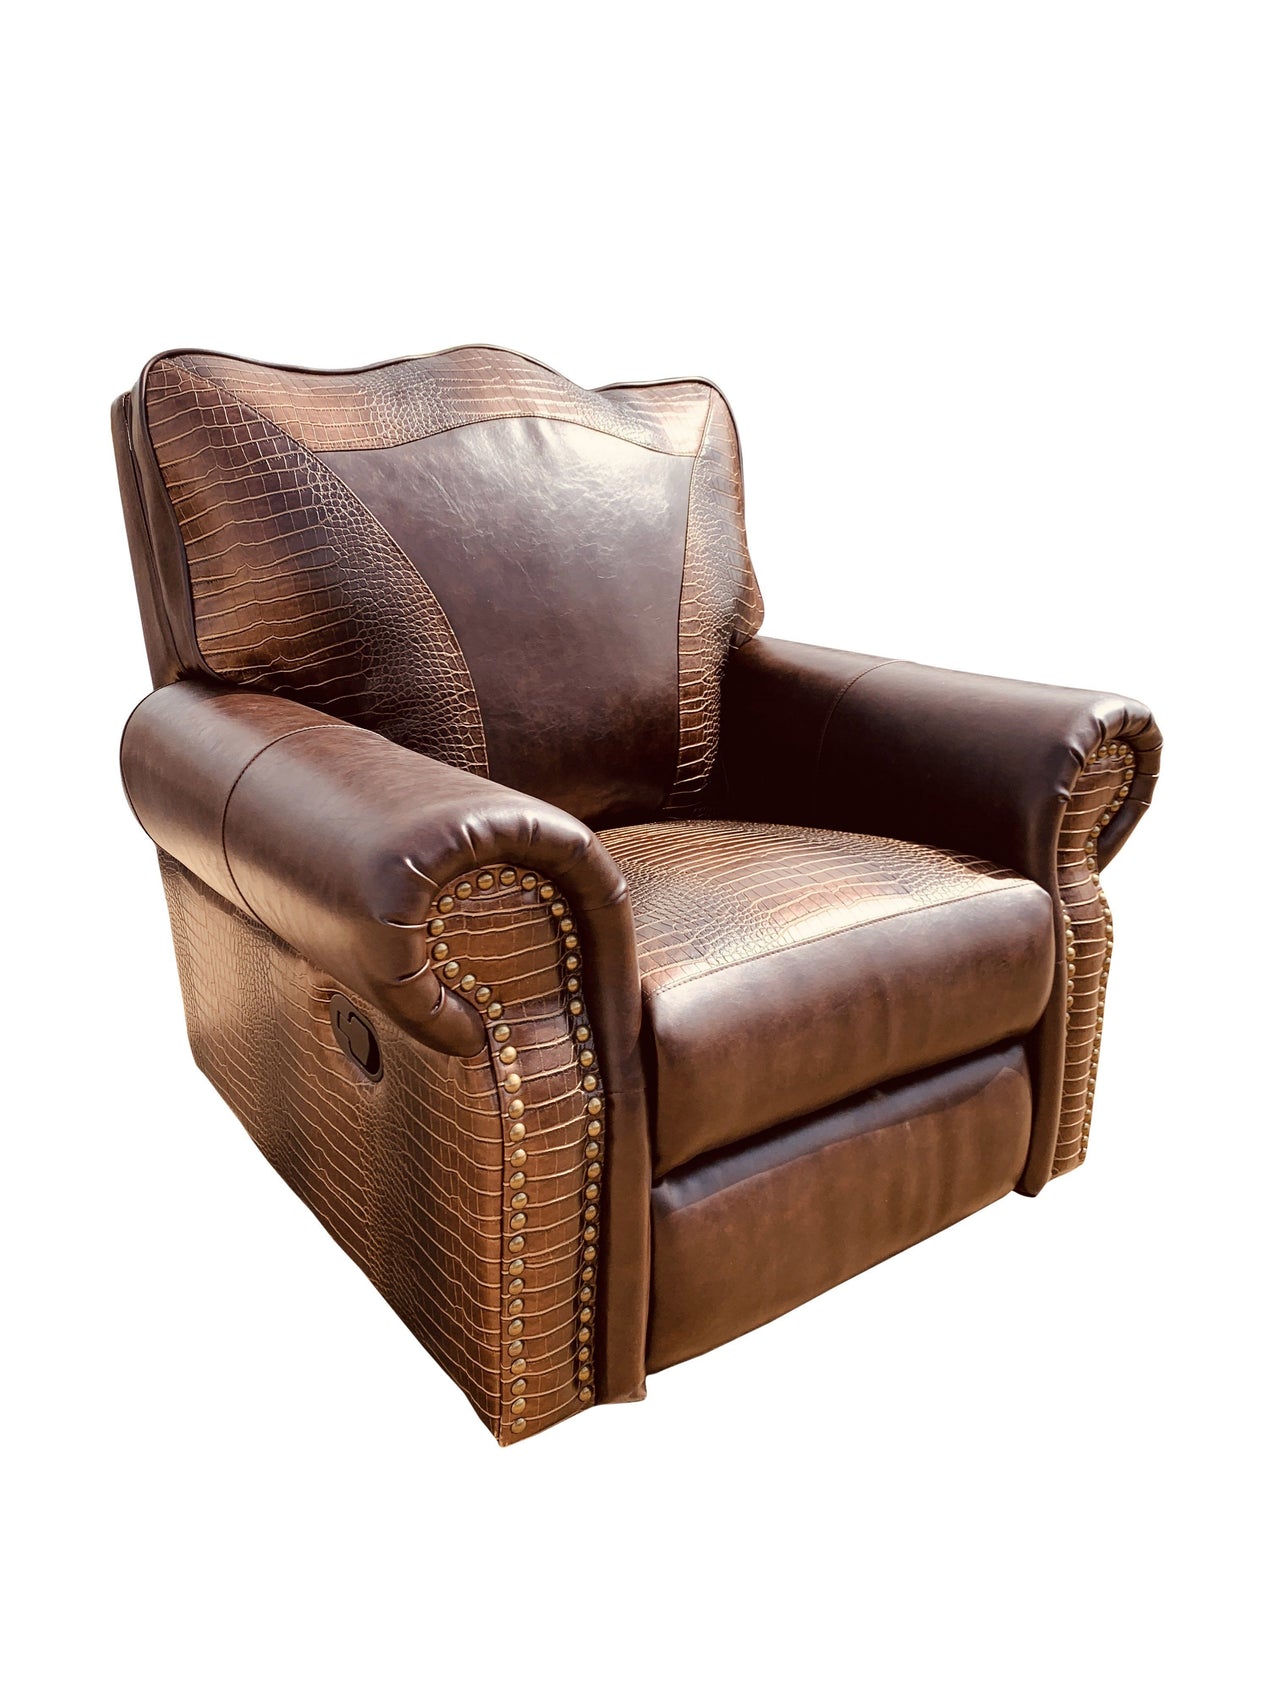 AFD Botswana Brown Chair Rocker Recliner Chairs AFD TWO TONE 